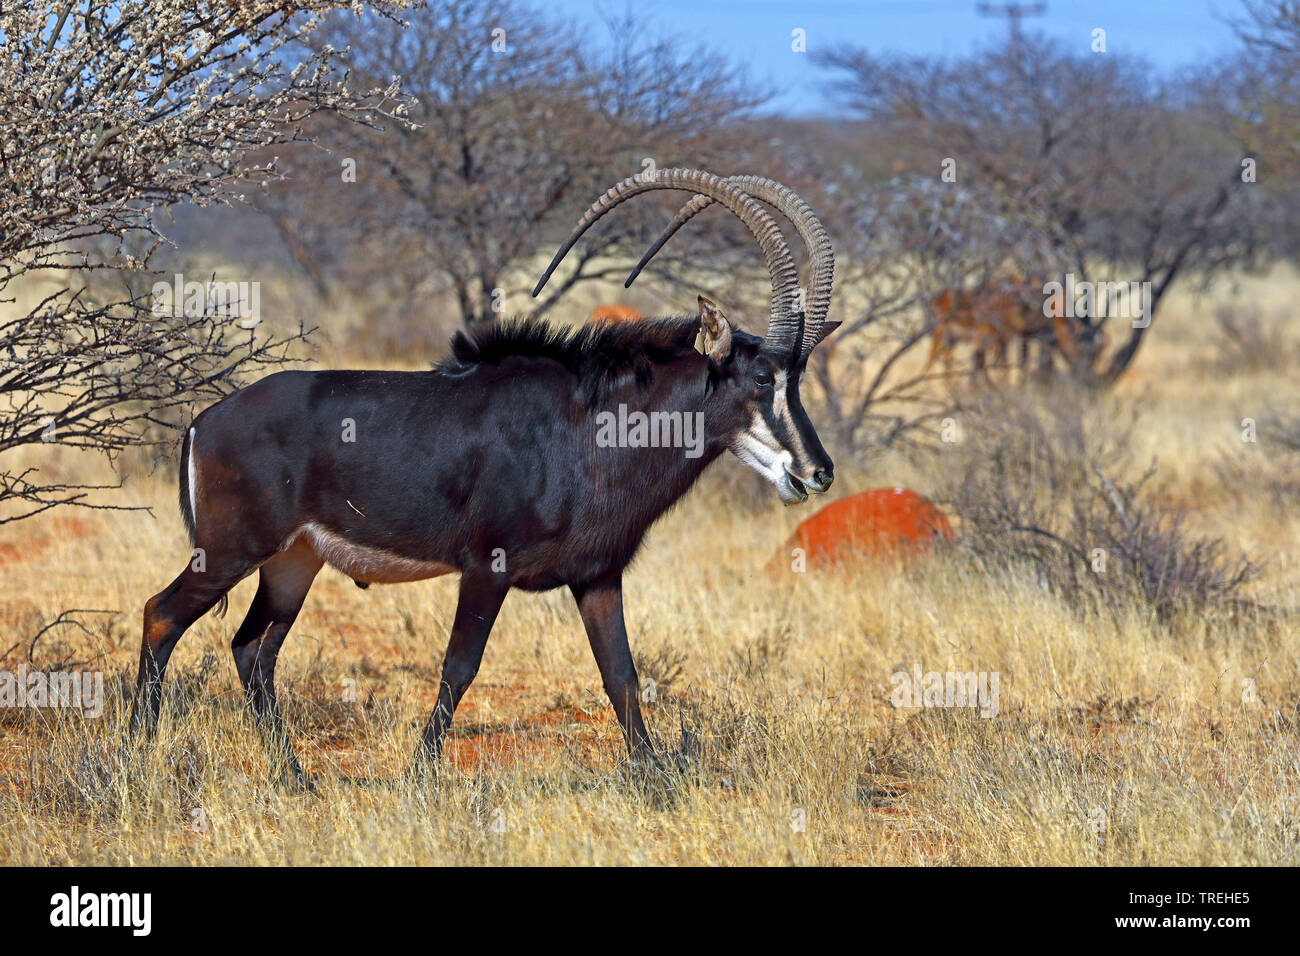 sable antelope (Hippotragus niger), male in savanna, South Africa Stock Photo